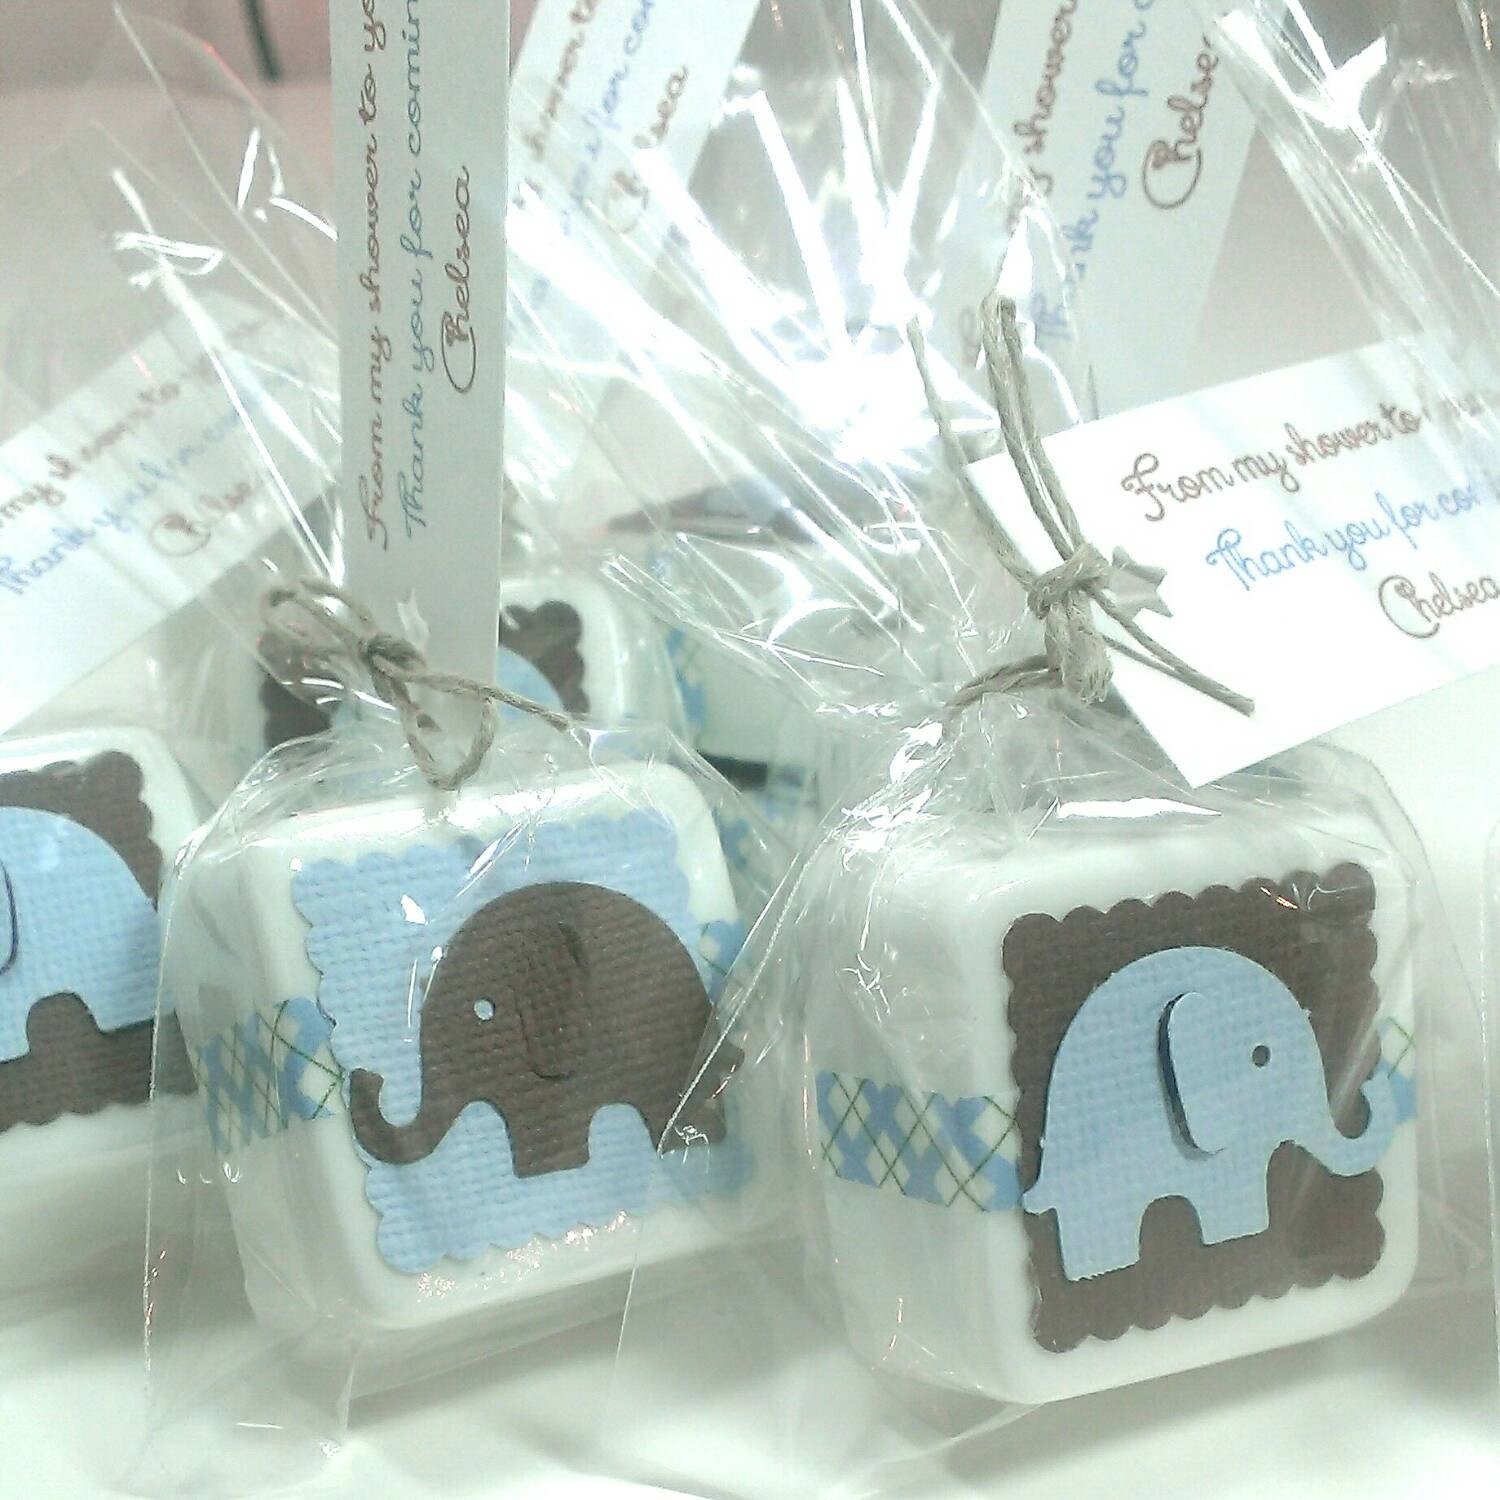 10 Most Recommended Party Favors Ideas For Baby Shower baby shower favor ideas baby ideas 6 2022